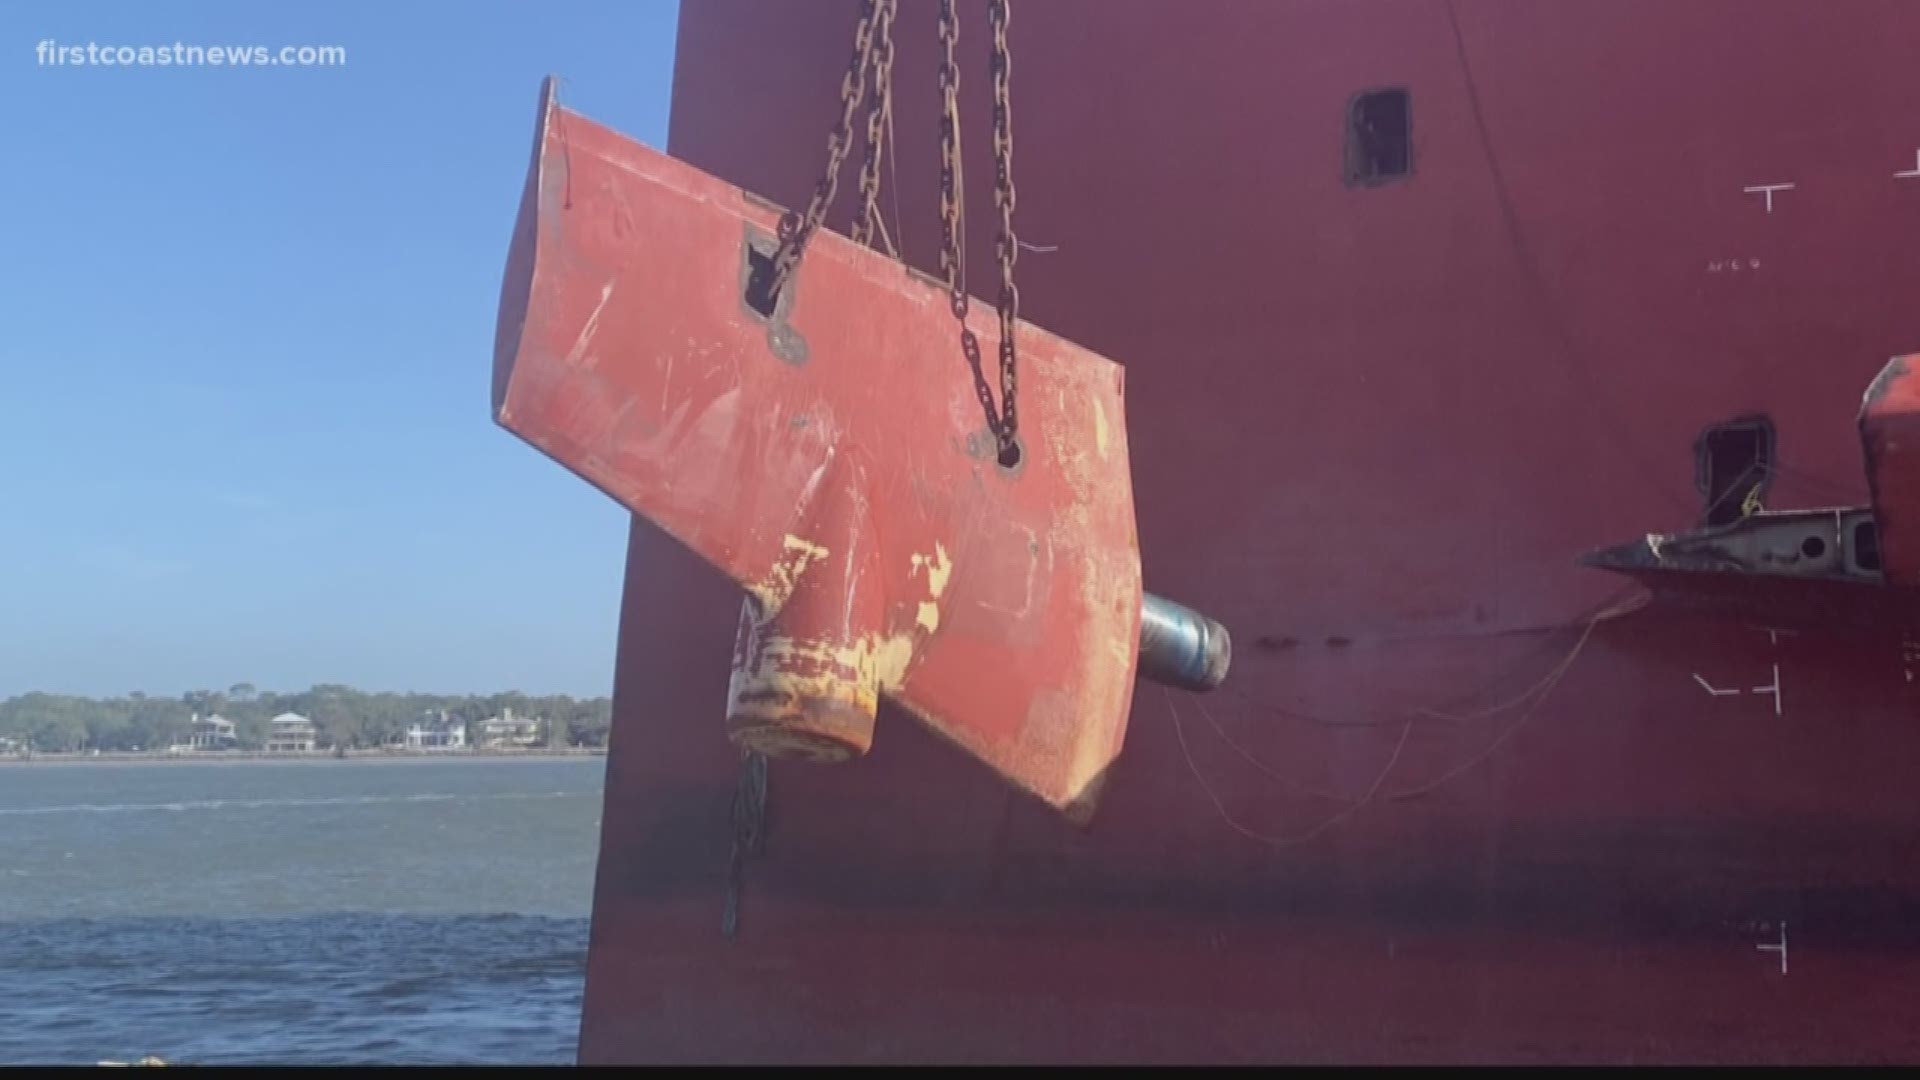 After the propeller, propeller shaft and rudder were removed from the Golden Ray, an expert says the focus now shifts to preparing the ship for being taken apart.